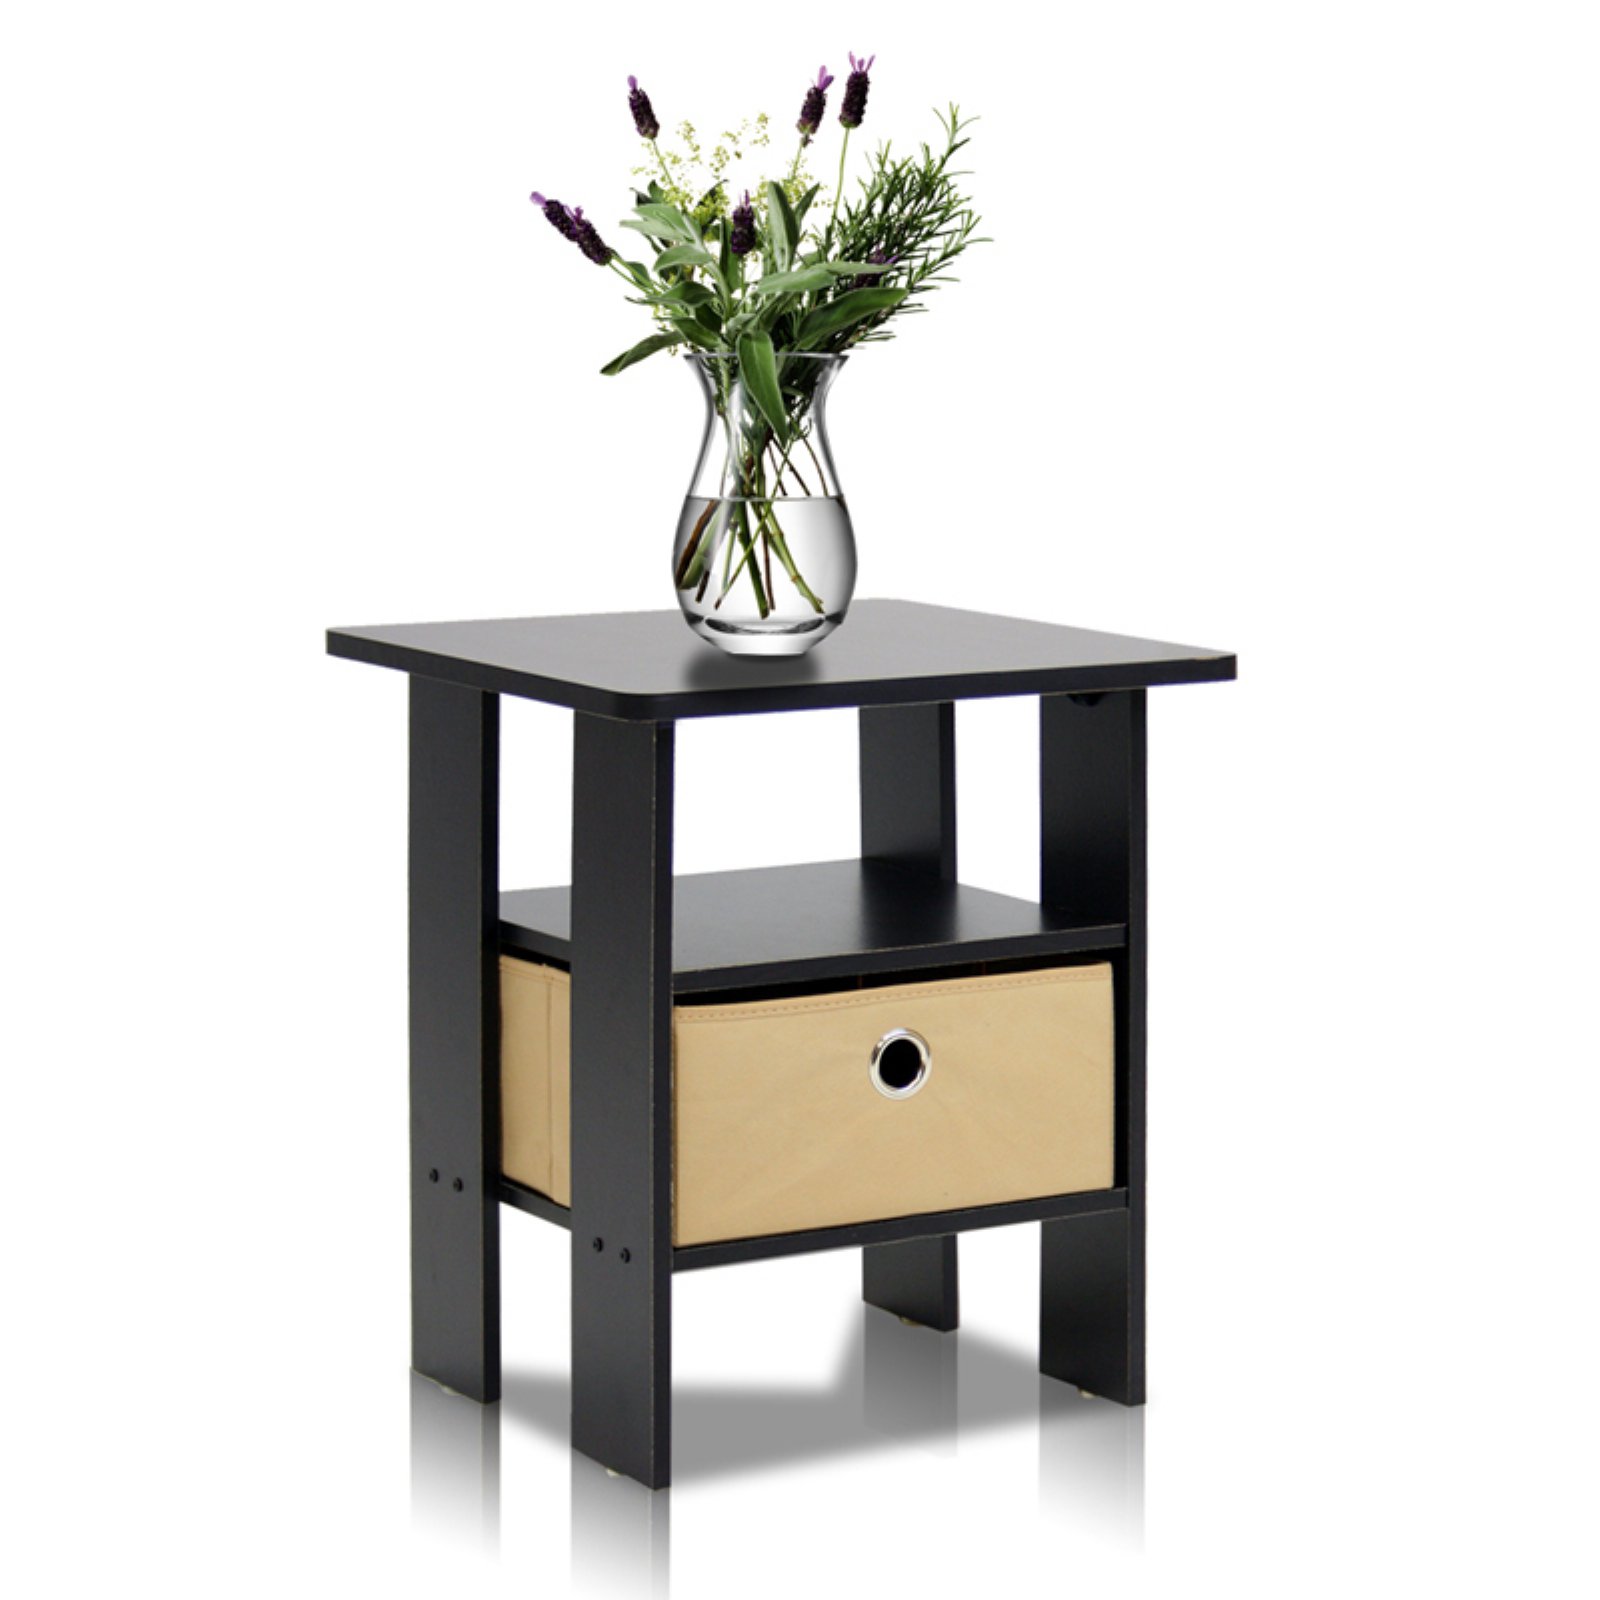 Furinno Andrey Engineered Wood End Table with Bin Drawer in Steam Beech/Natural - image 5 of 7